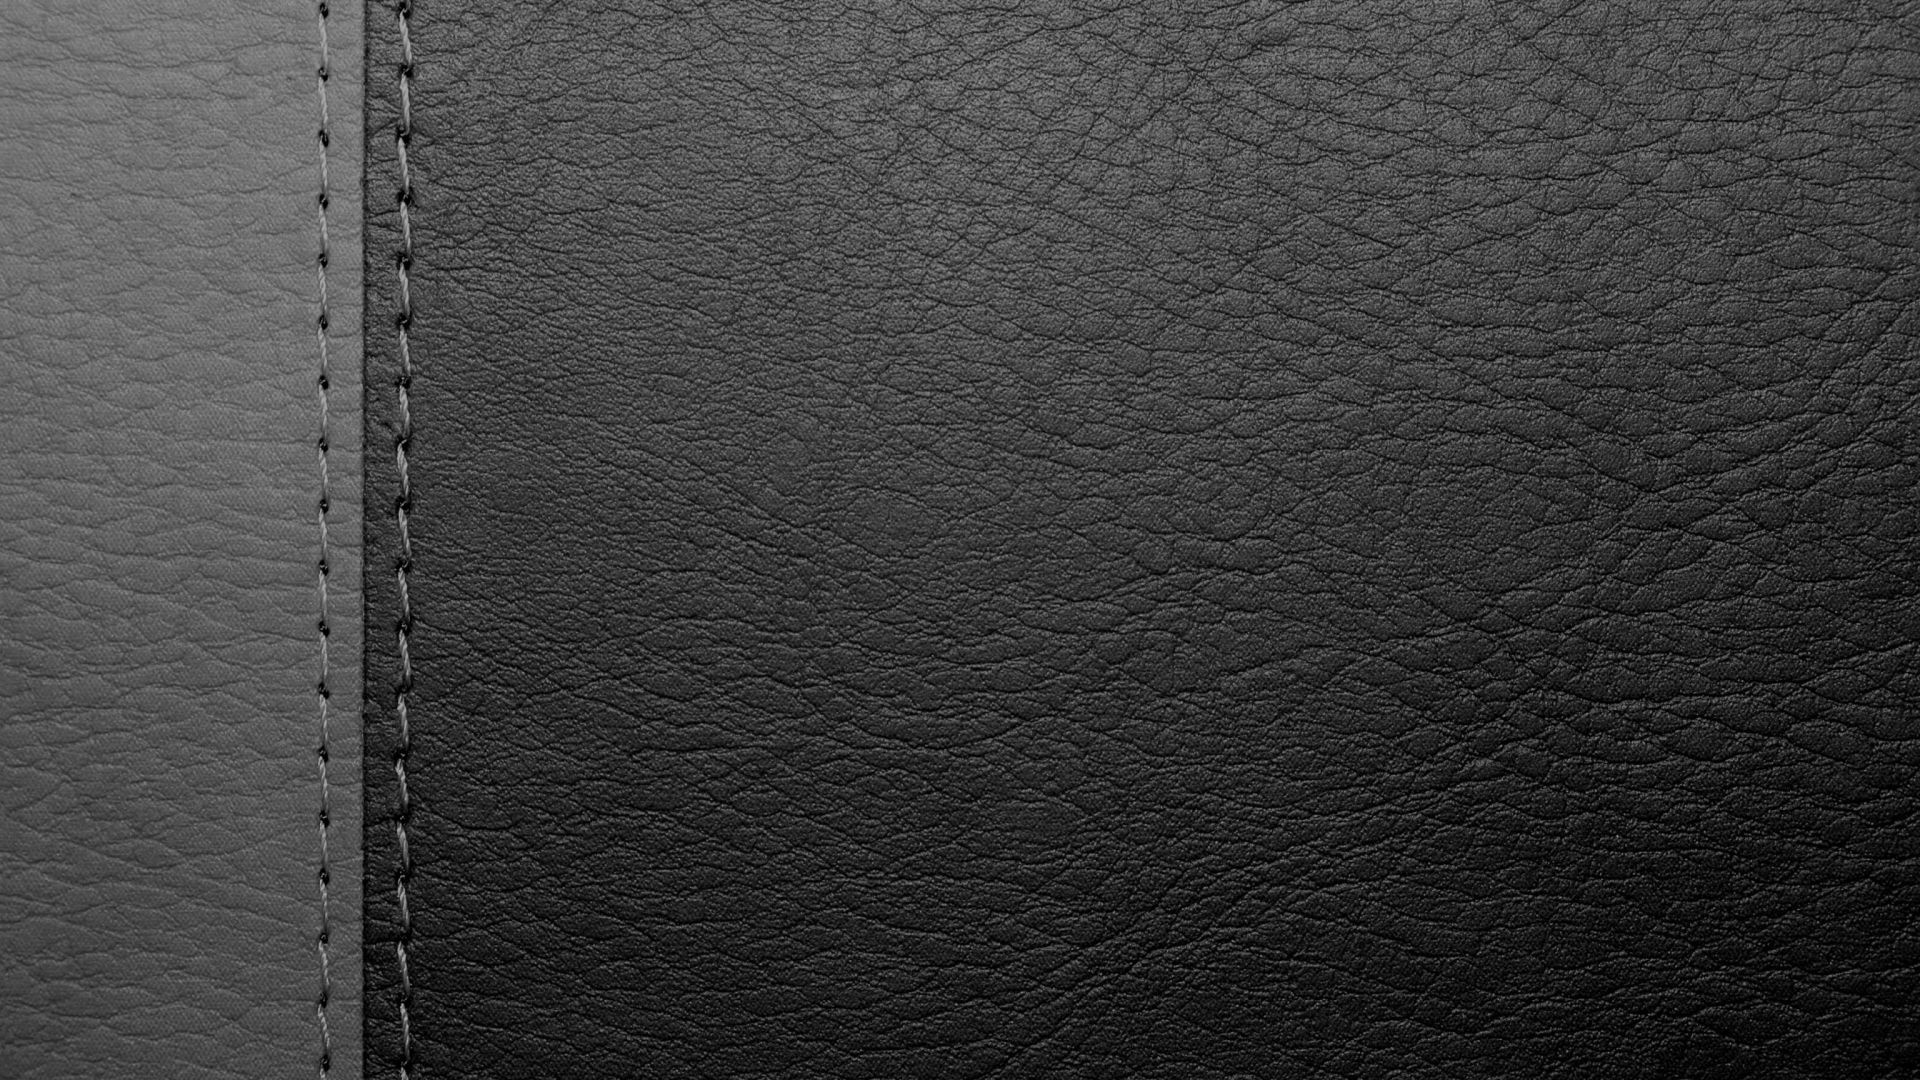 Hd leather wallpapers, High-resolution images, Luxurious texture, Modern style, 1920x1080 Full HD Desktop